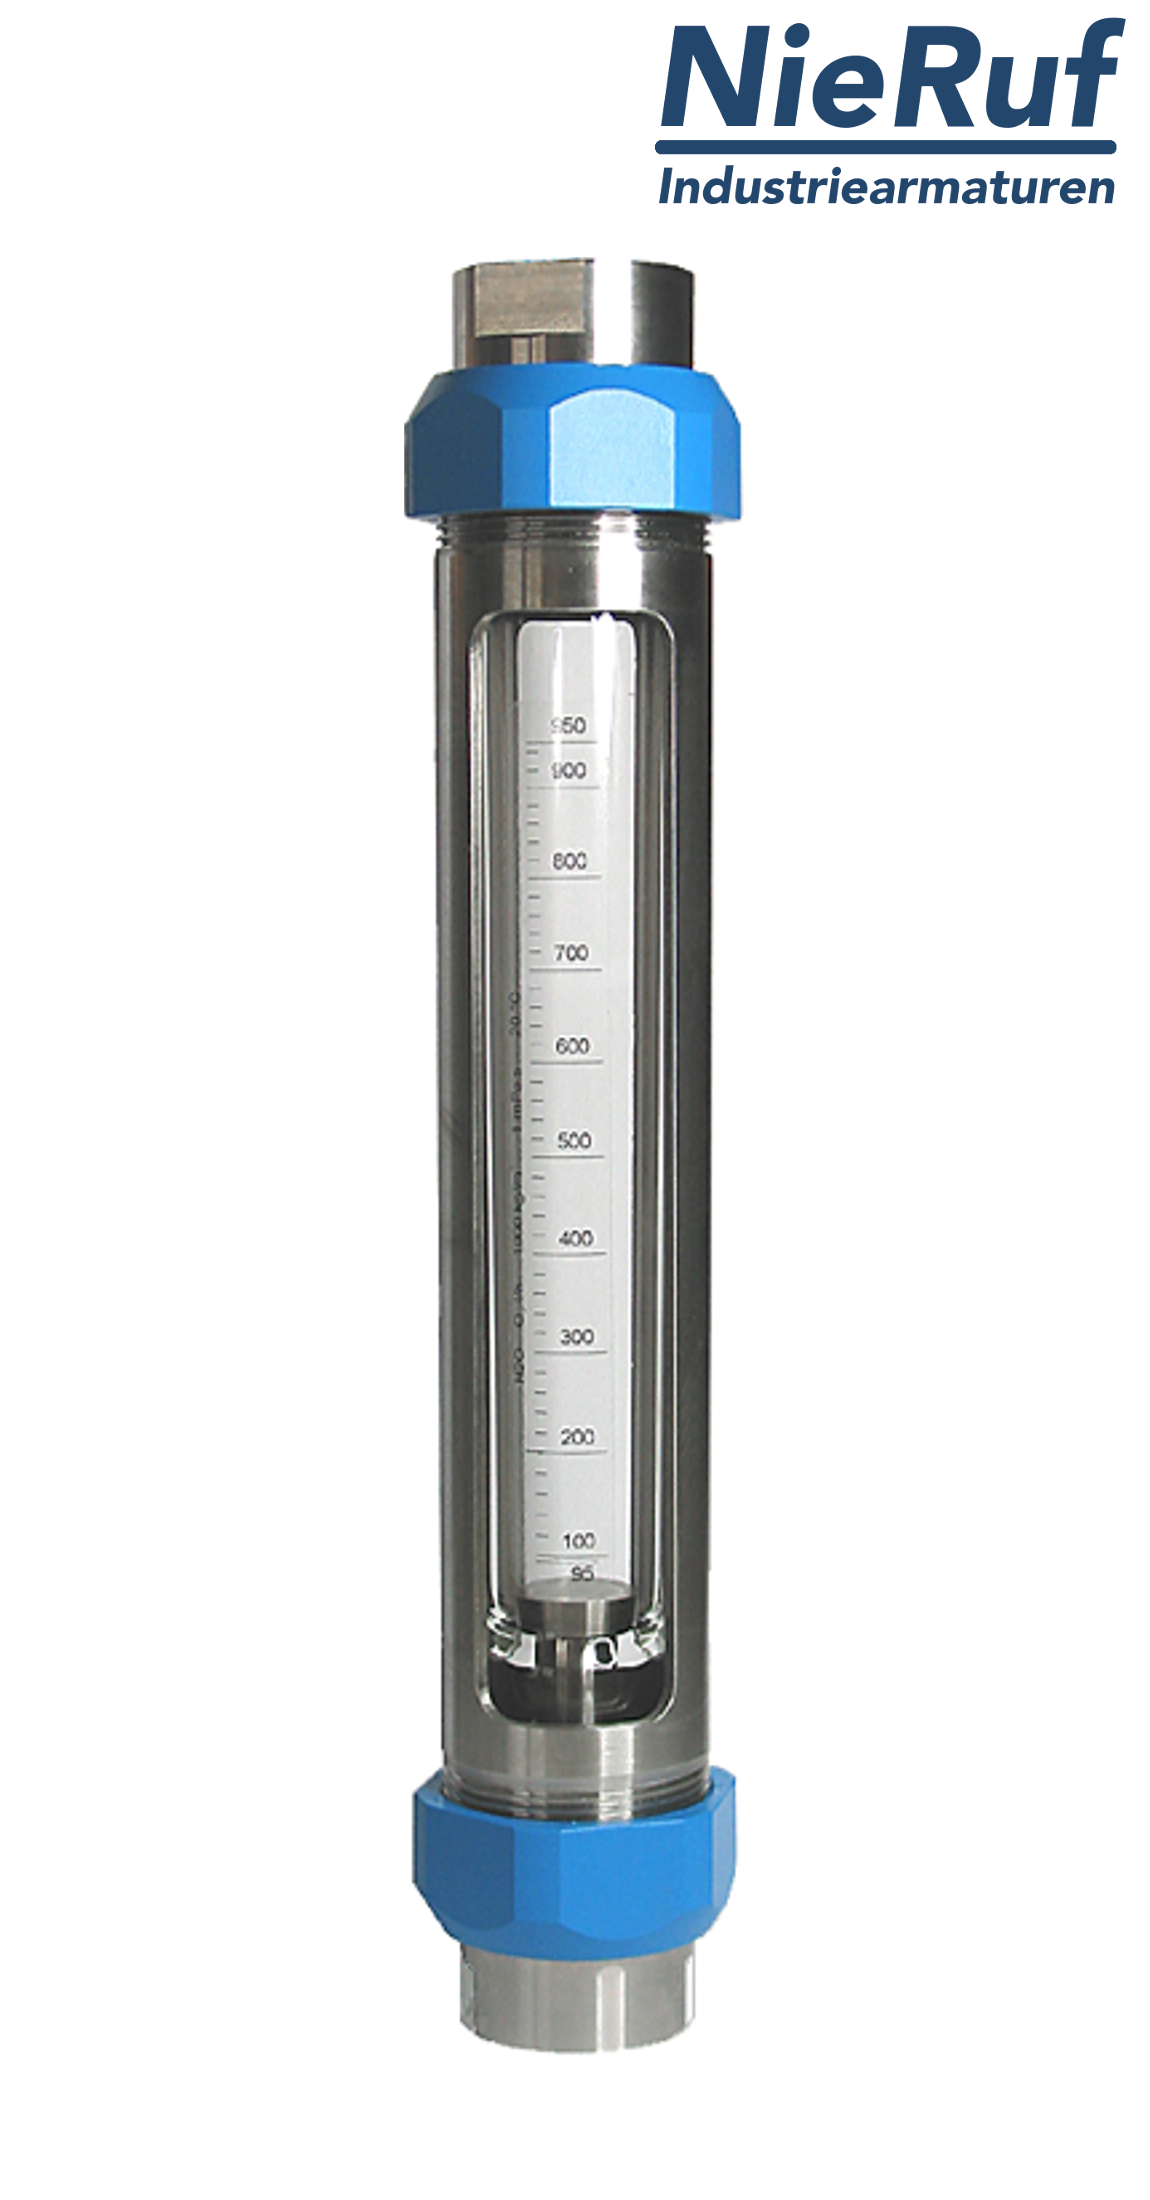 Variable area flowmeter stainless steel + borosilicate 1/2" inch 8.0 - 80.0 l/h water FKM